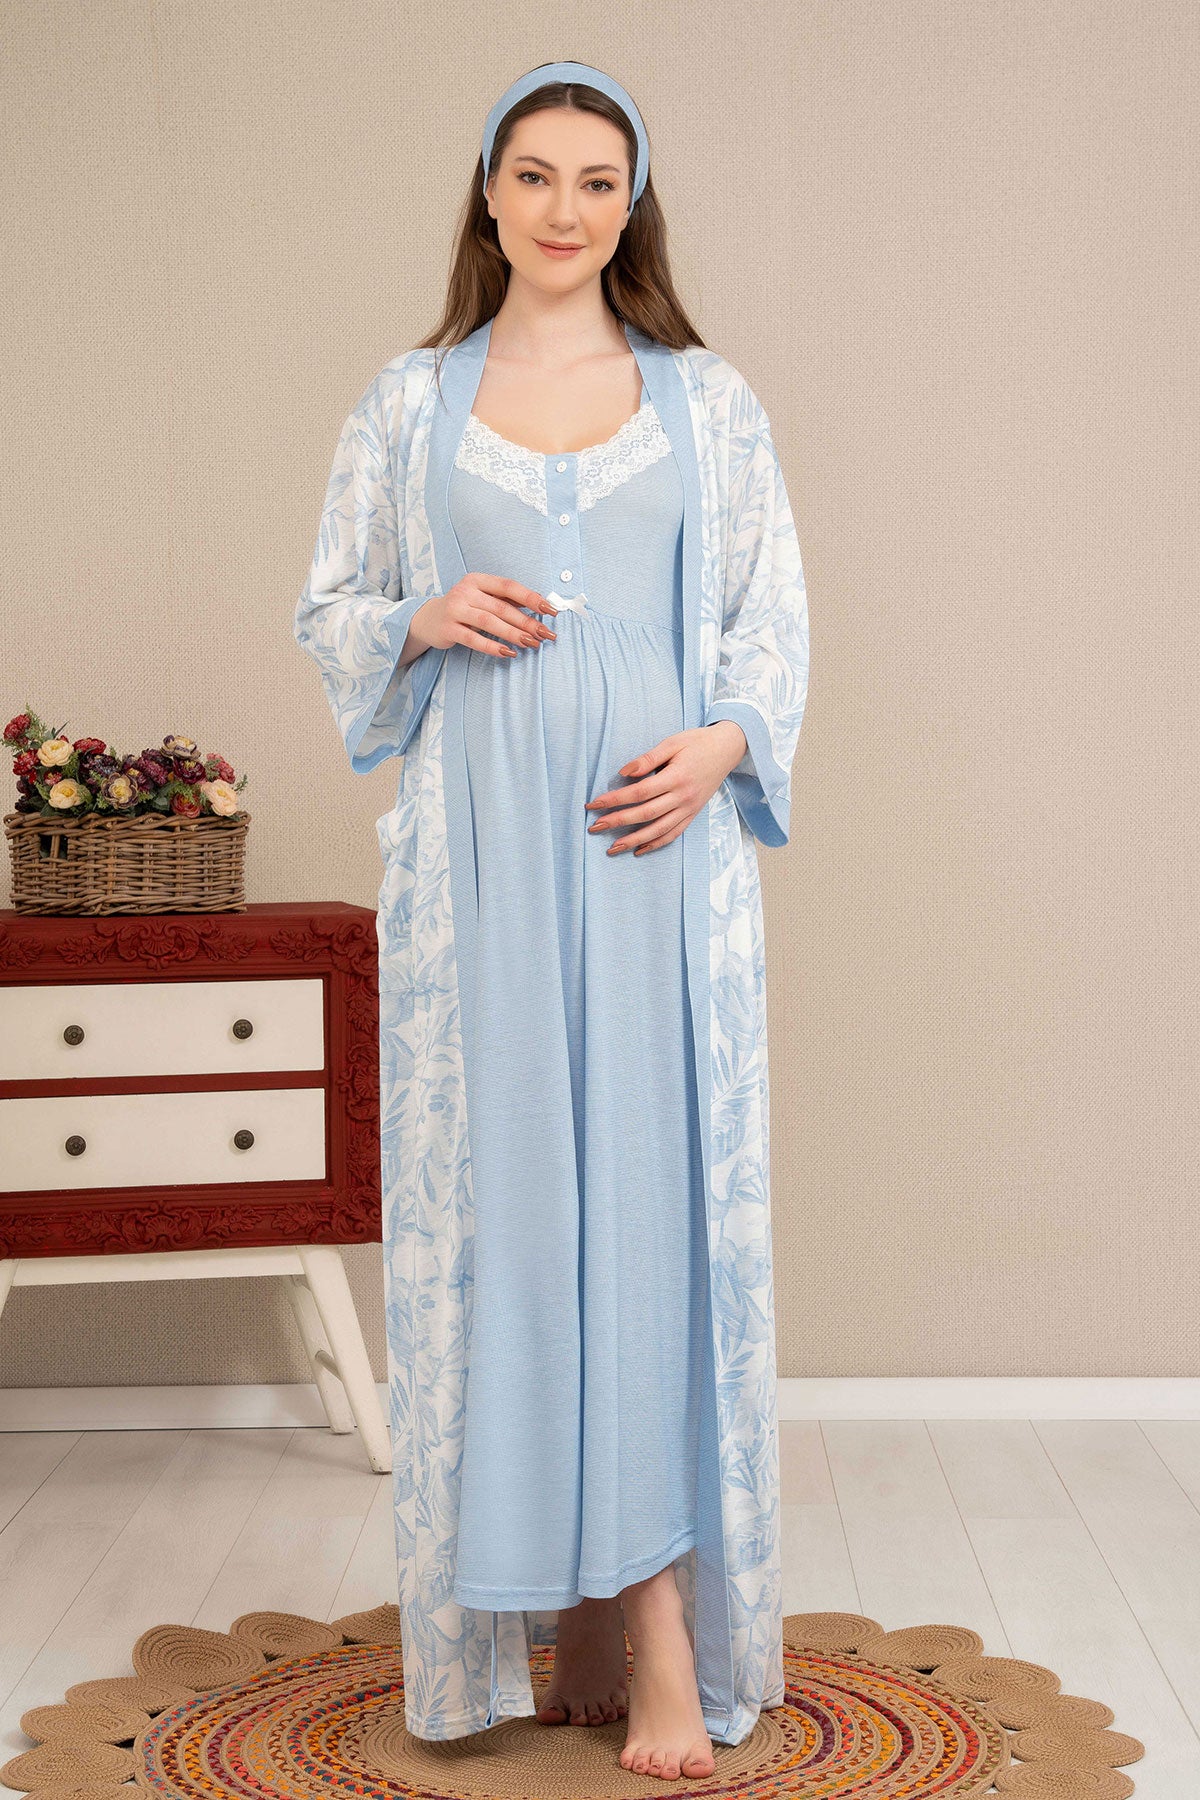 Shopymommy 4518 Lace Collar Maternity & Nursing Nightgown With Patterned Robe Blue